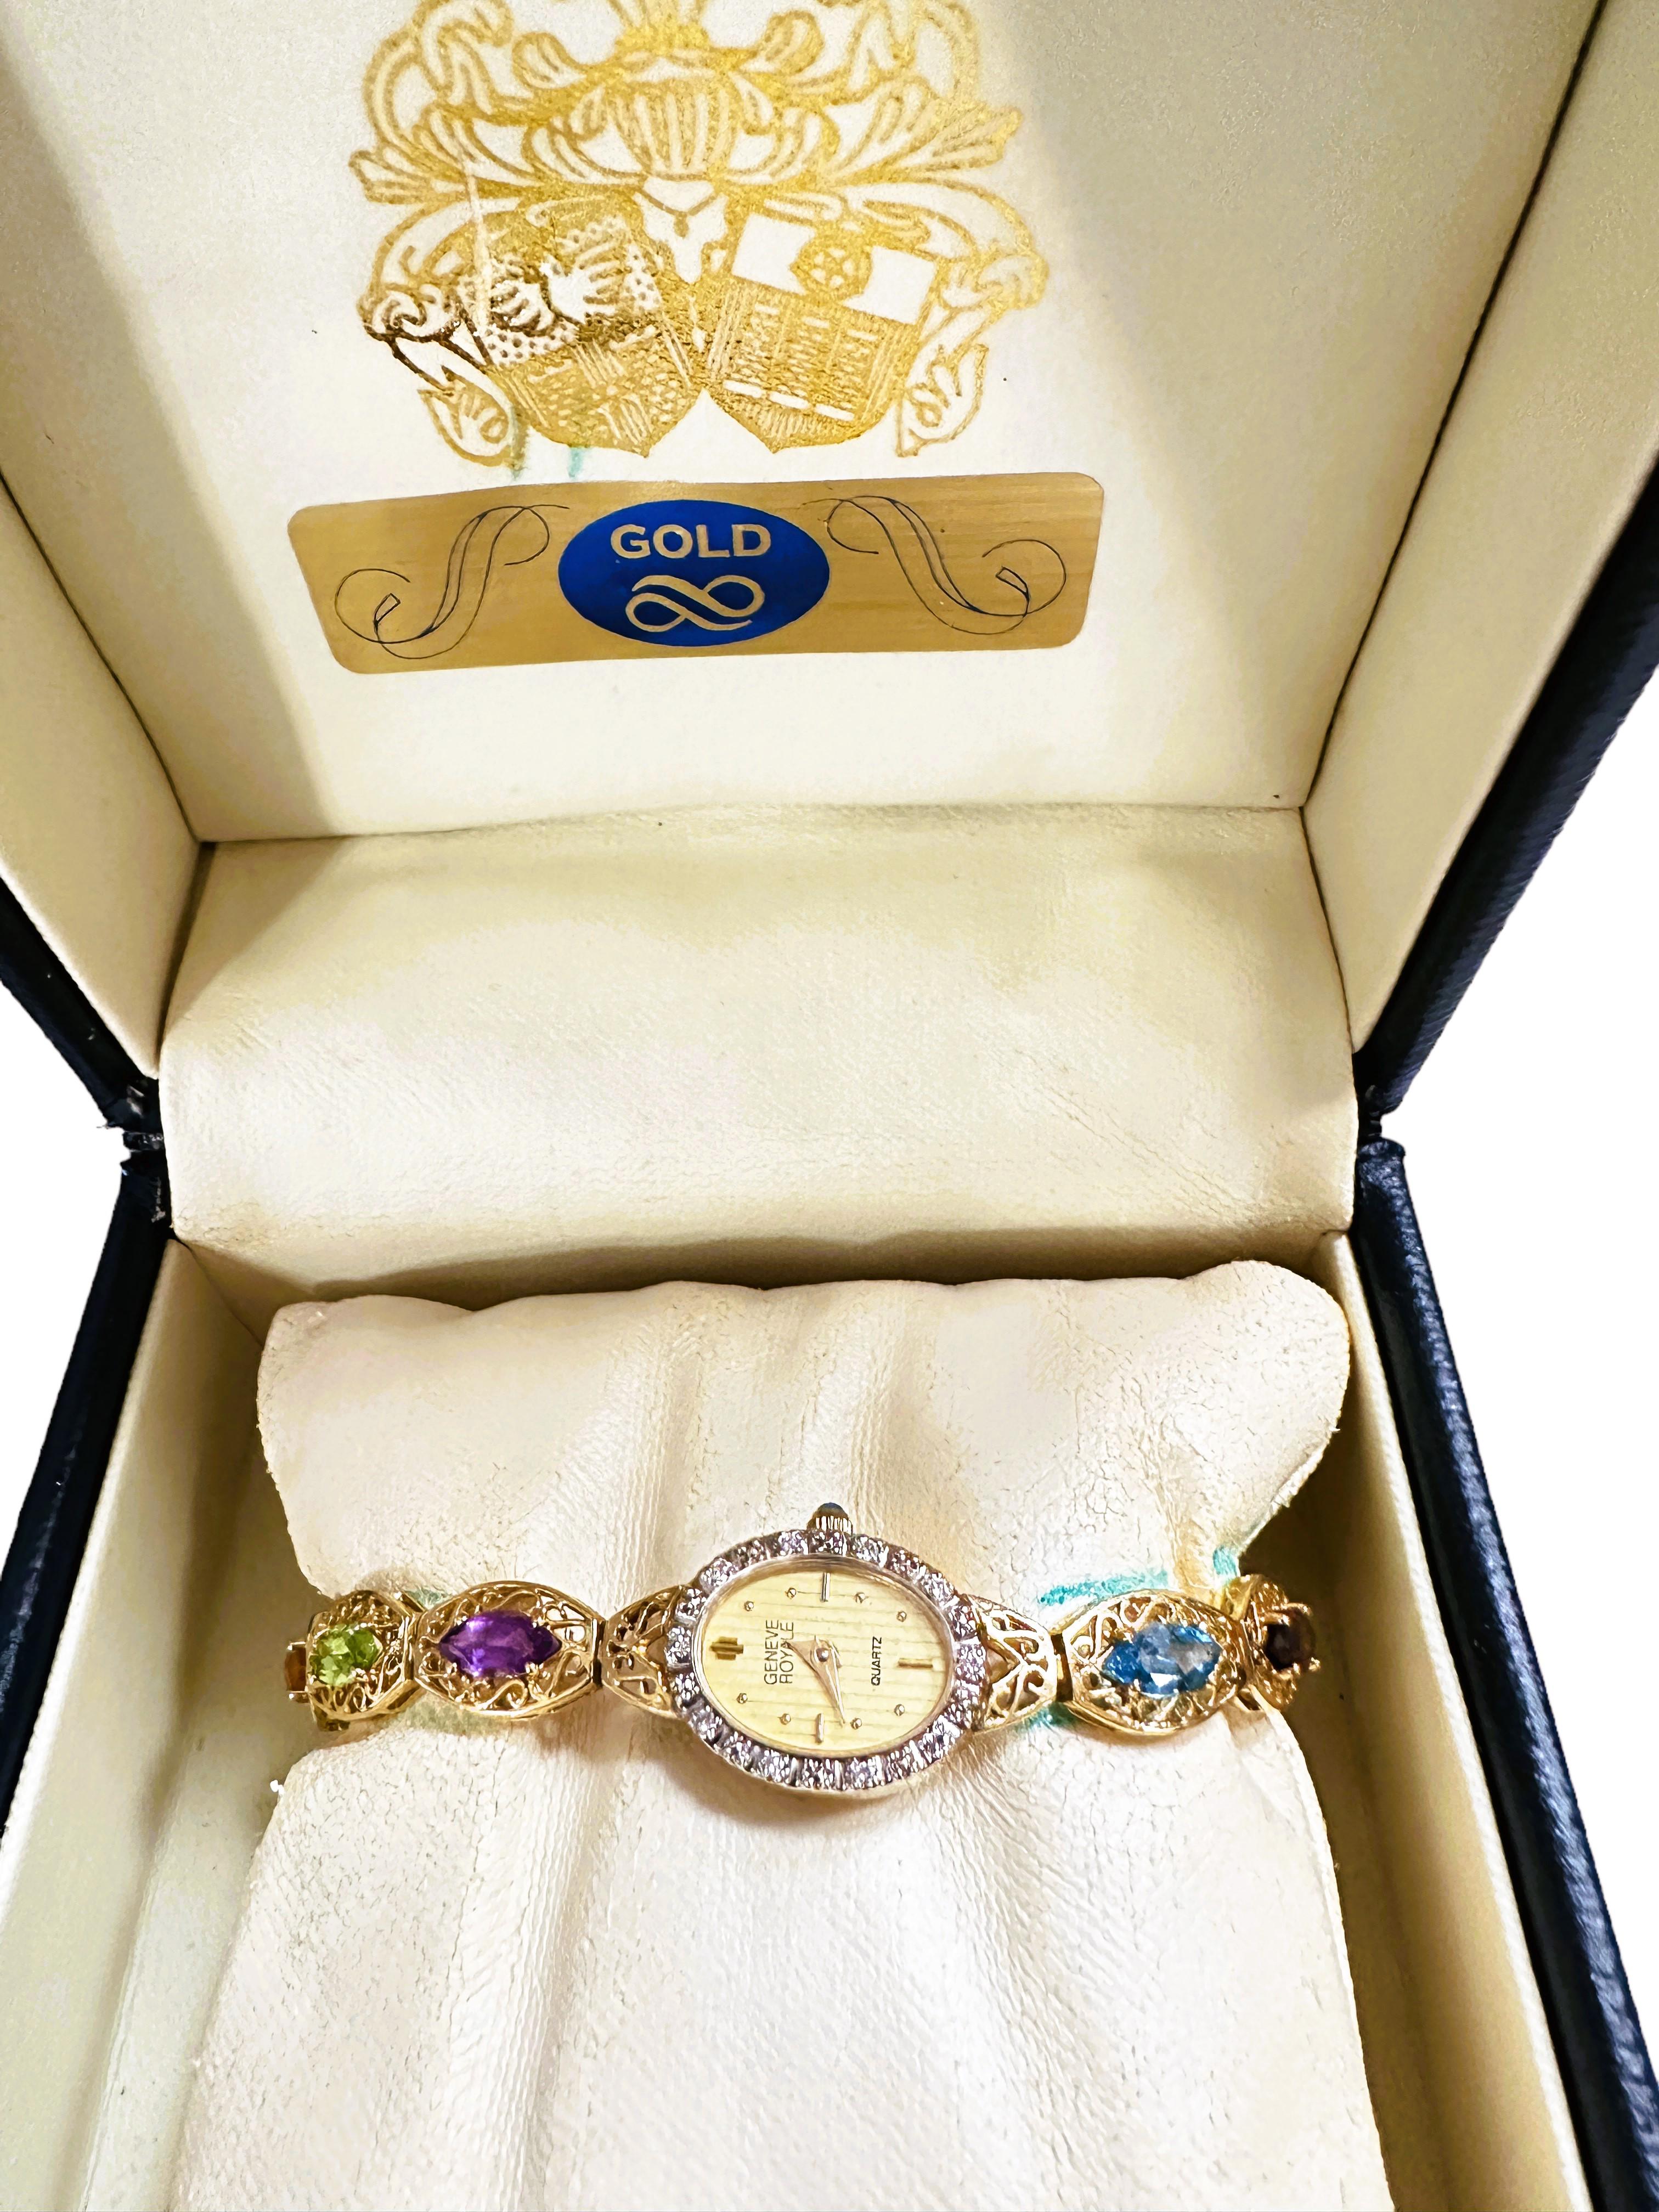 This is a really beautiful watch!  The case as well as the bracelet are 14k Gold.  The bracelet is a gorgeous filigree pattern and has 12 marquise cut gemstones measuring 8 x 4 mm.  The gemstones are citrine, amethyst, peridot, garnet and topaz.  It